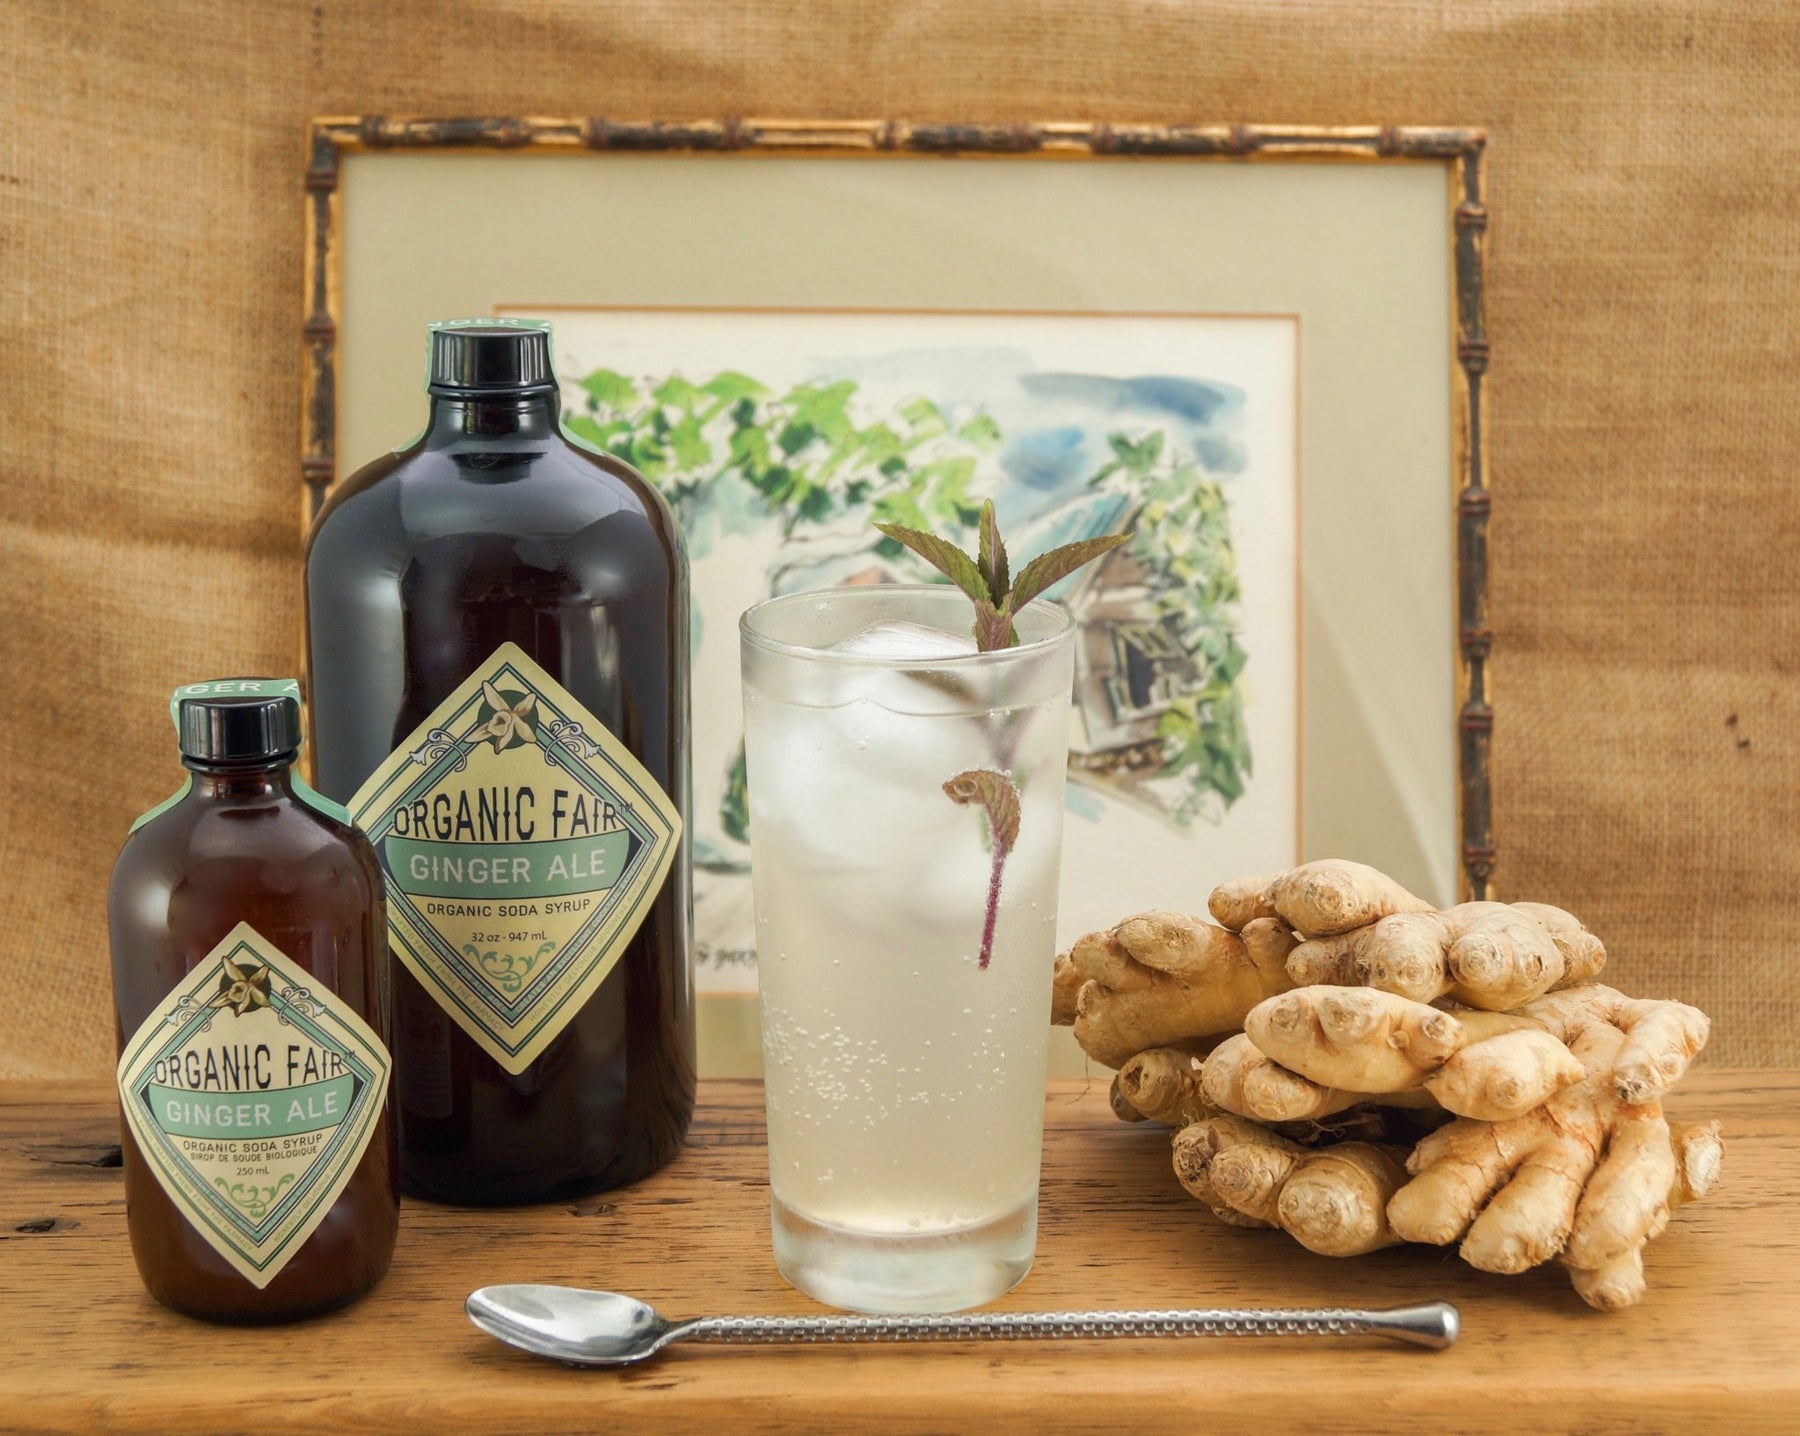 Get to Know Our Ginger Ale - organicfair.com